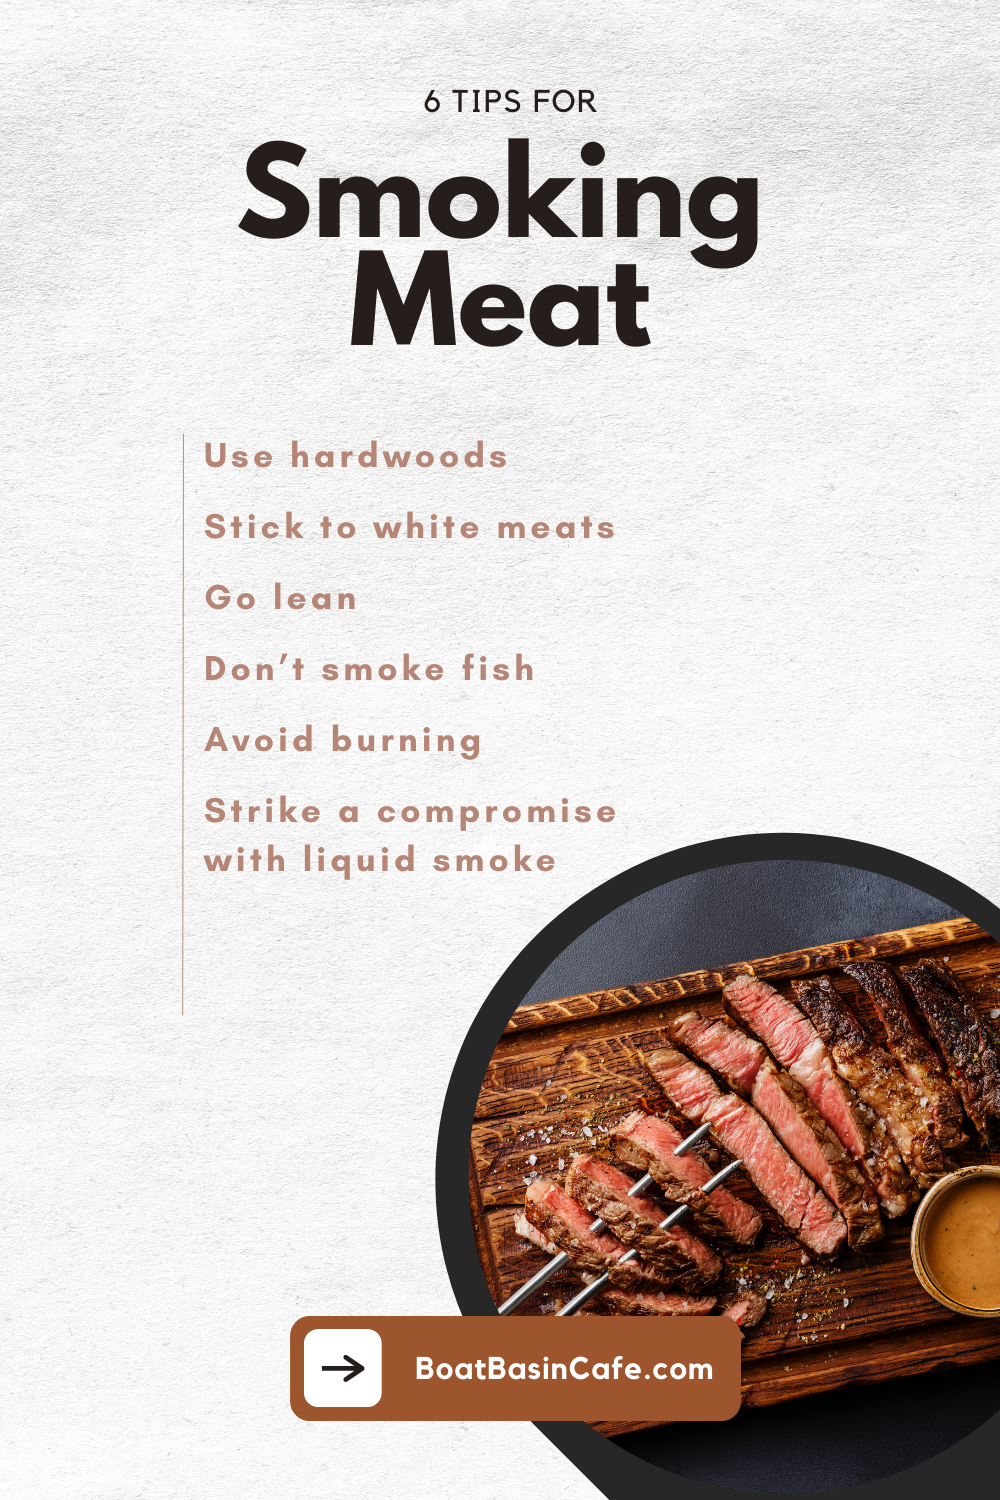 6 Tips for Smoking Meat and Staying Healthy